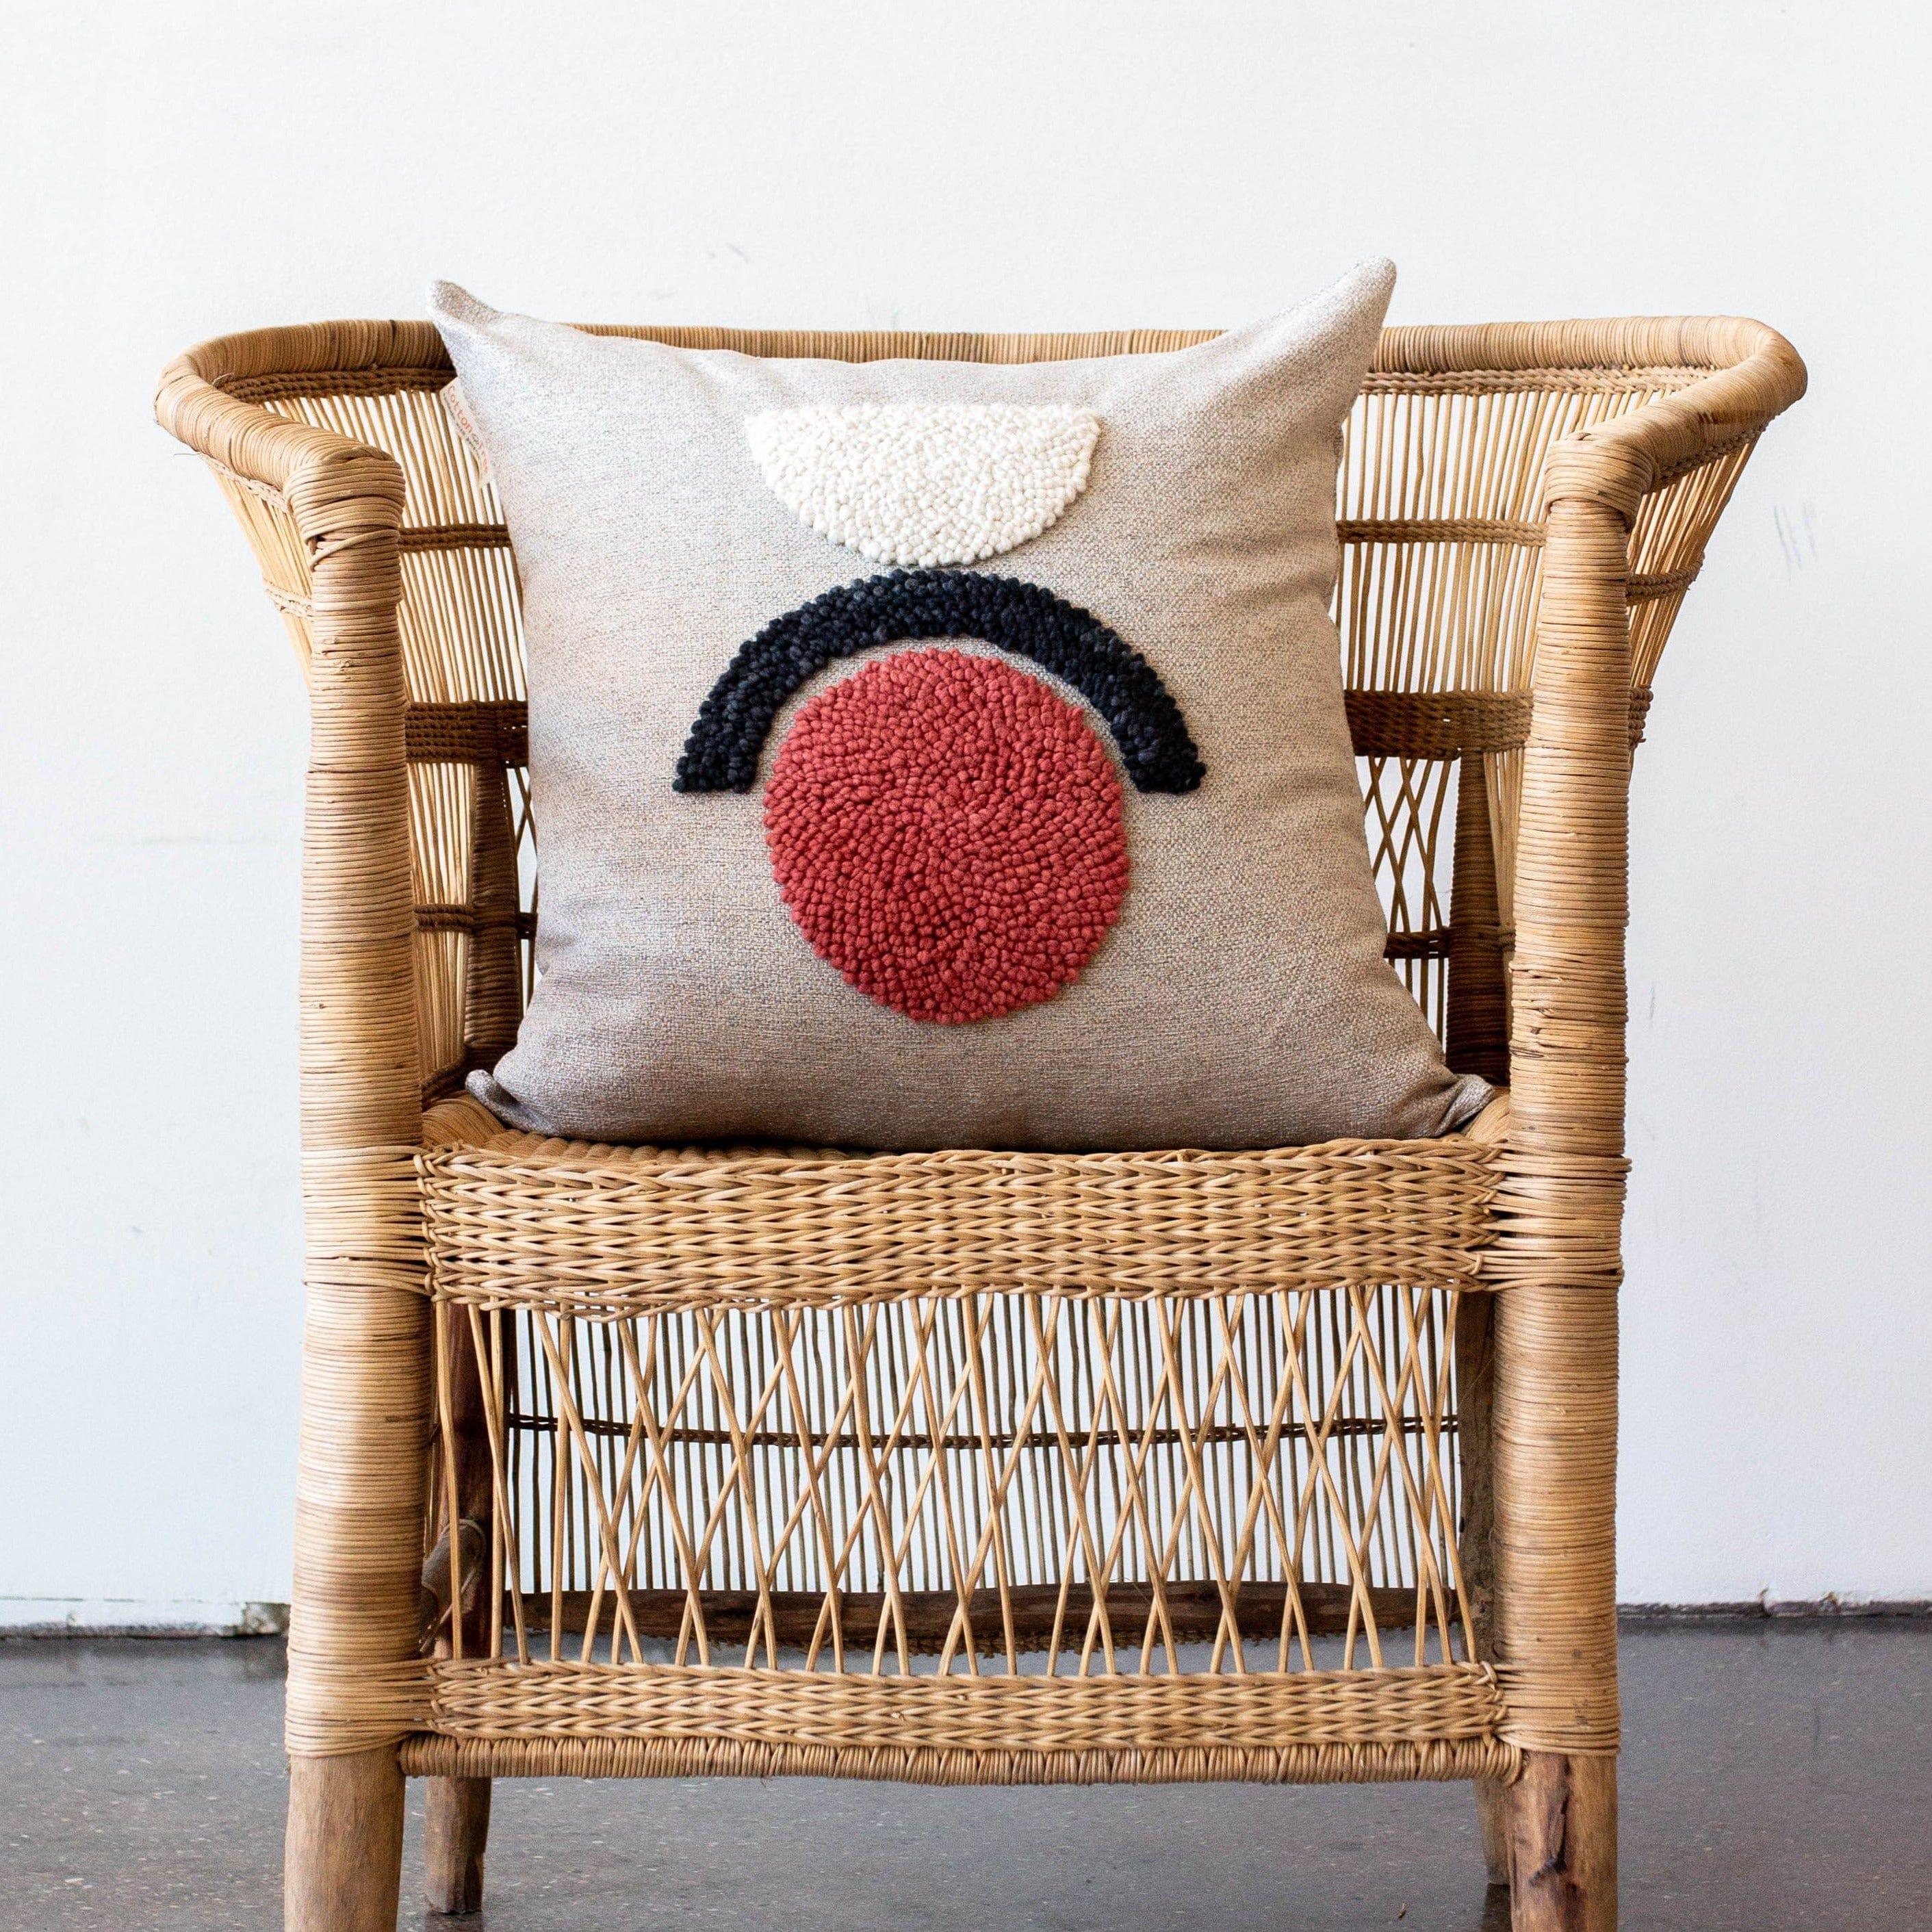 AfriScandi Sunrise Pillow kanju interiors African décor handmade natural organic color accent pillow cushion throw decorative lounge comfortable comfy unique modern contemporary stylish soft accent durable minimal couch chair bed luxury hand made thick plush yarn texture punch needle knitting simplicity original embroidered South Africa quality cotton cream black white tangerine circle half circle 